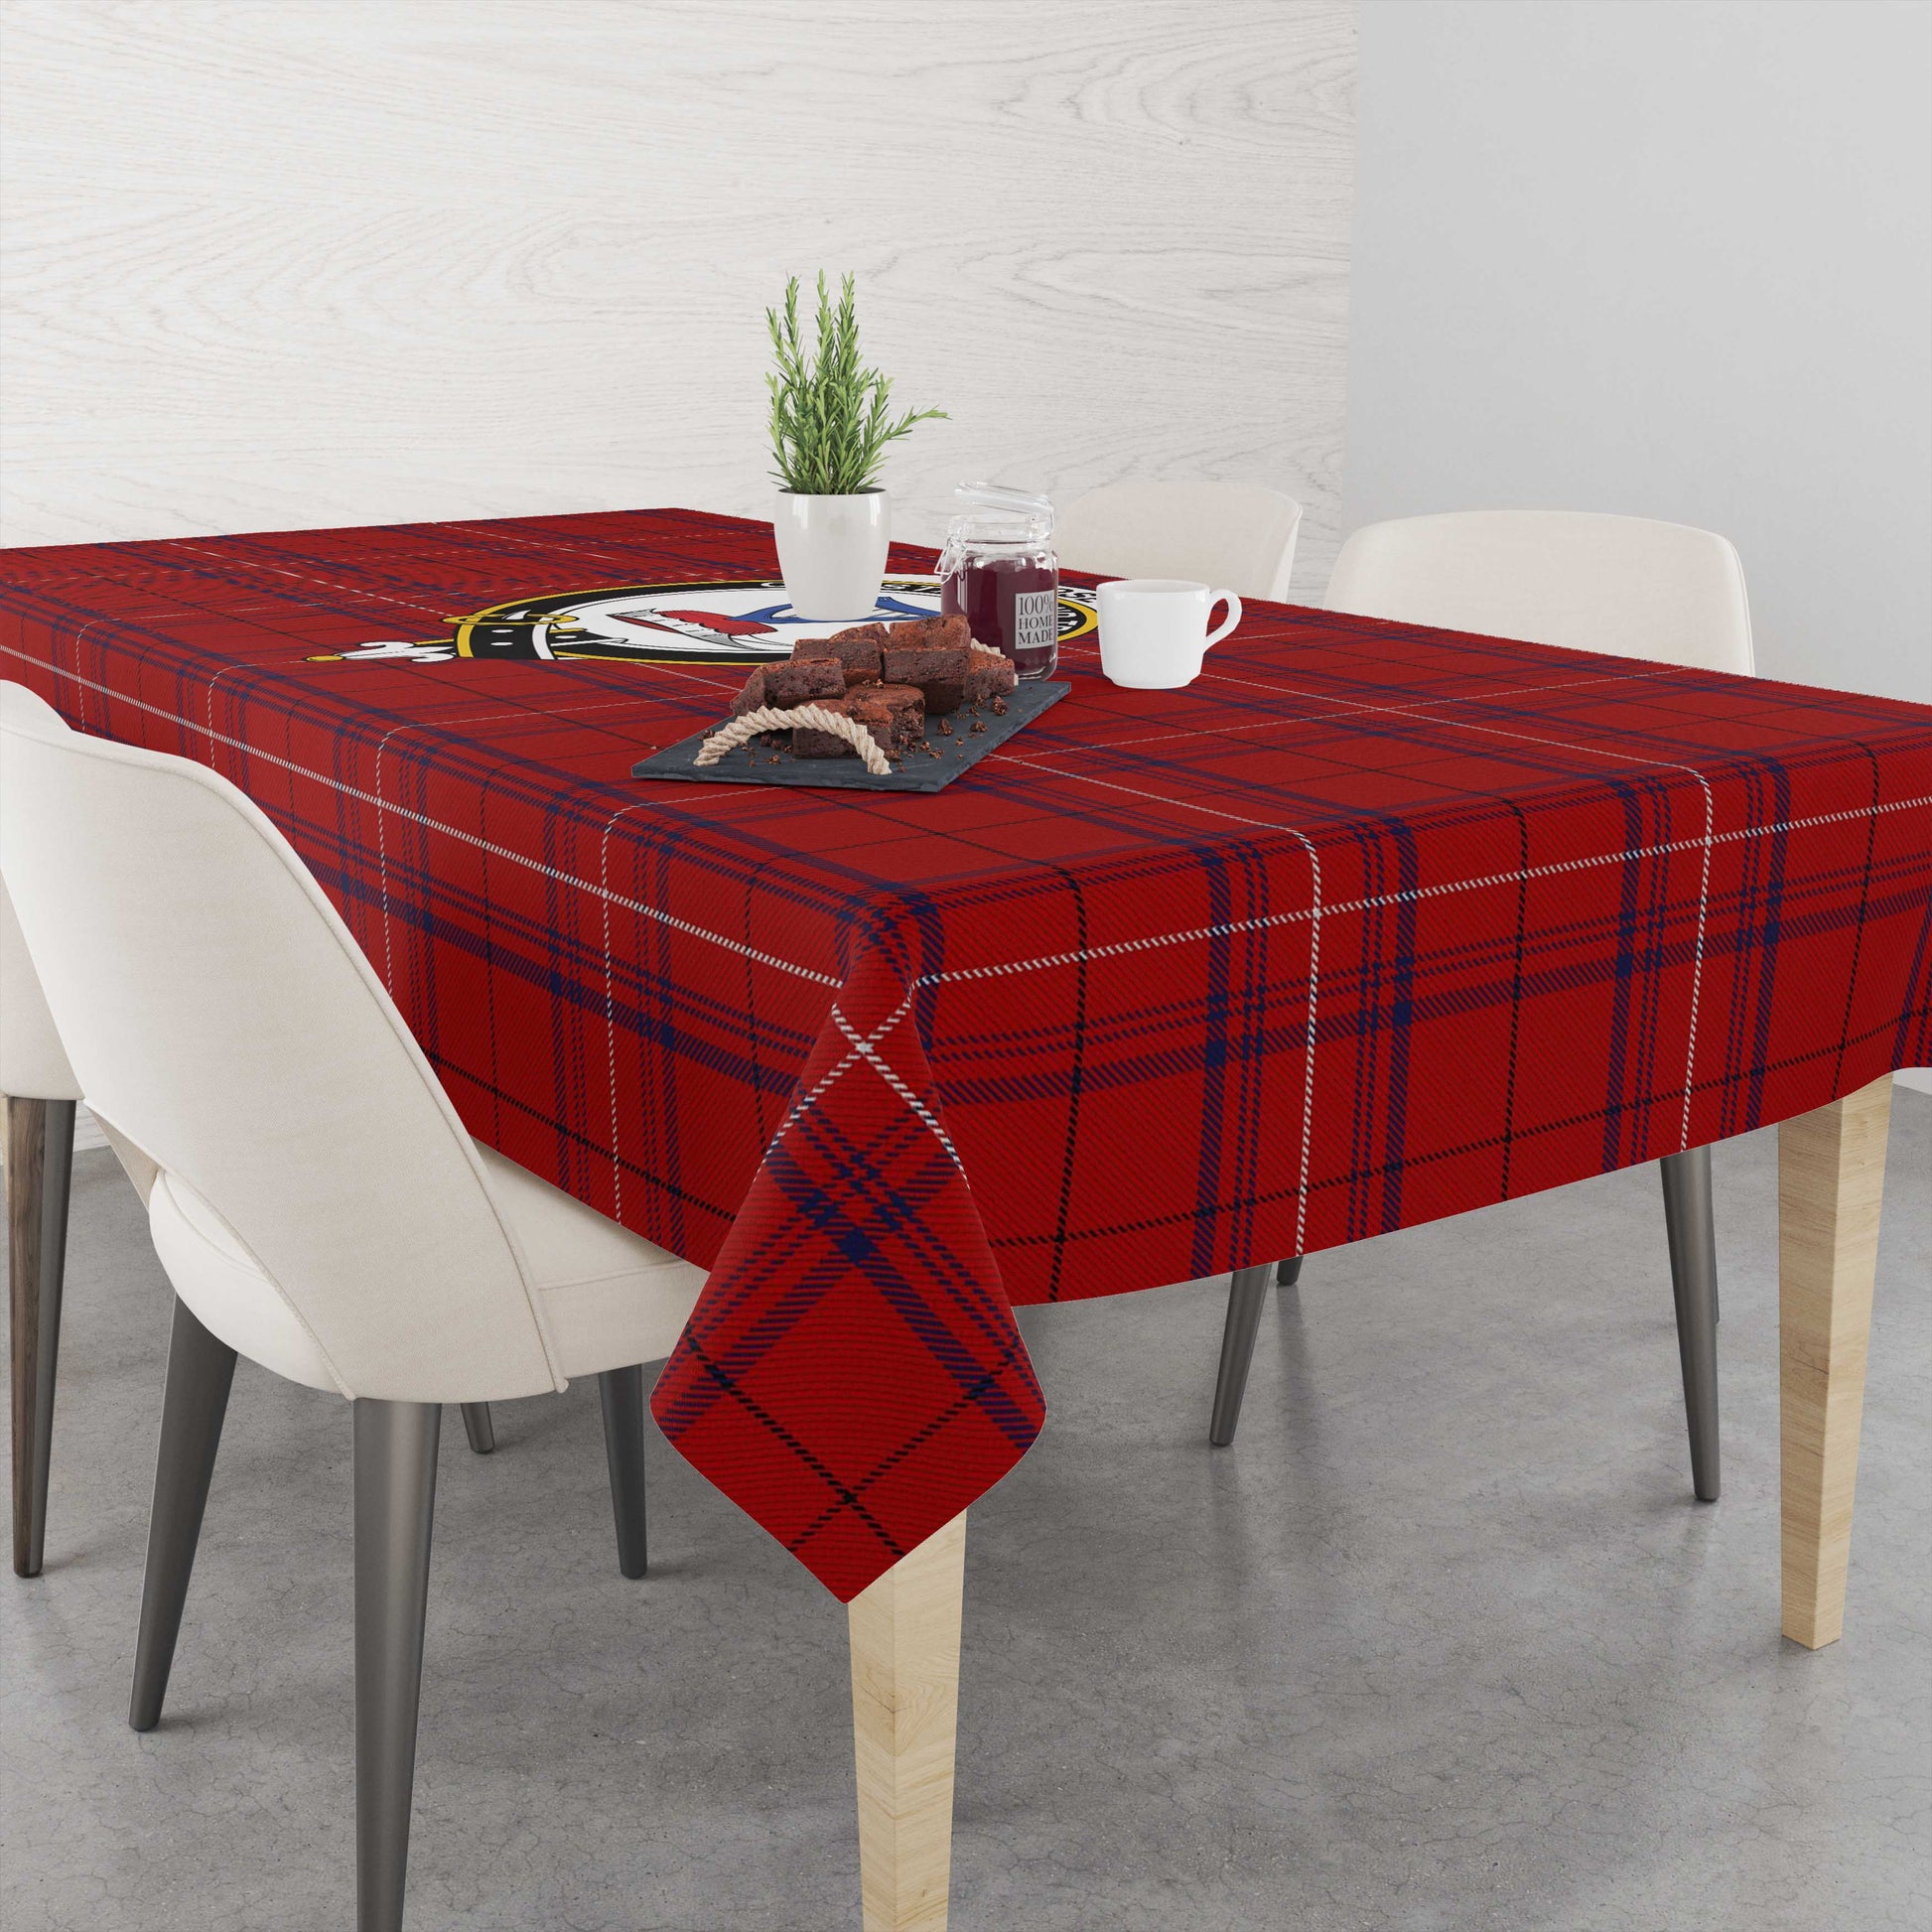 rose-of-kilravock-tatan-tablecloth-with-family-crest